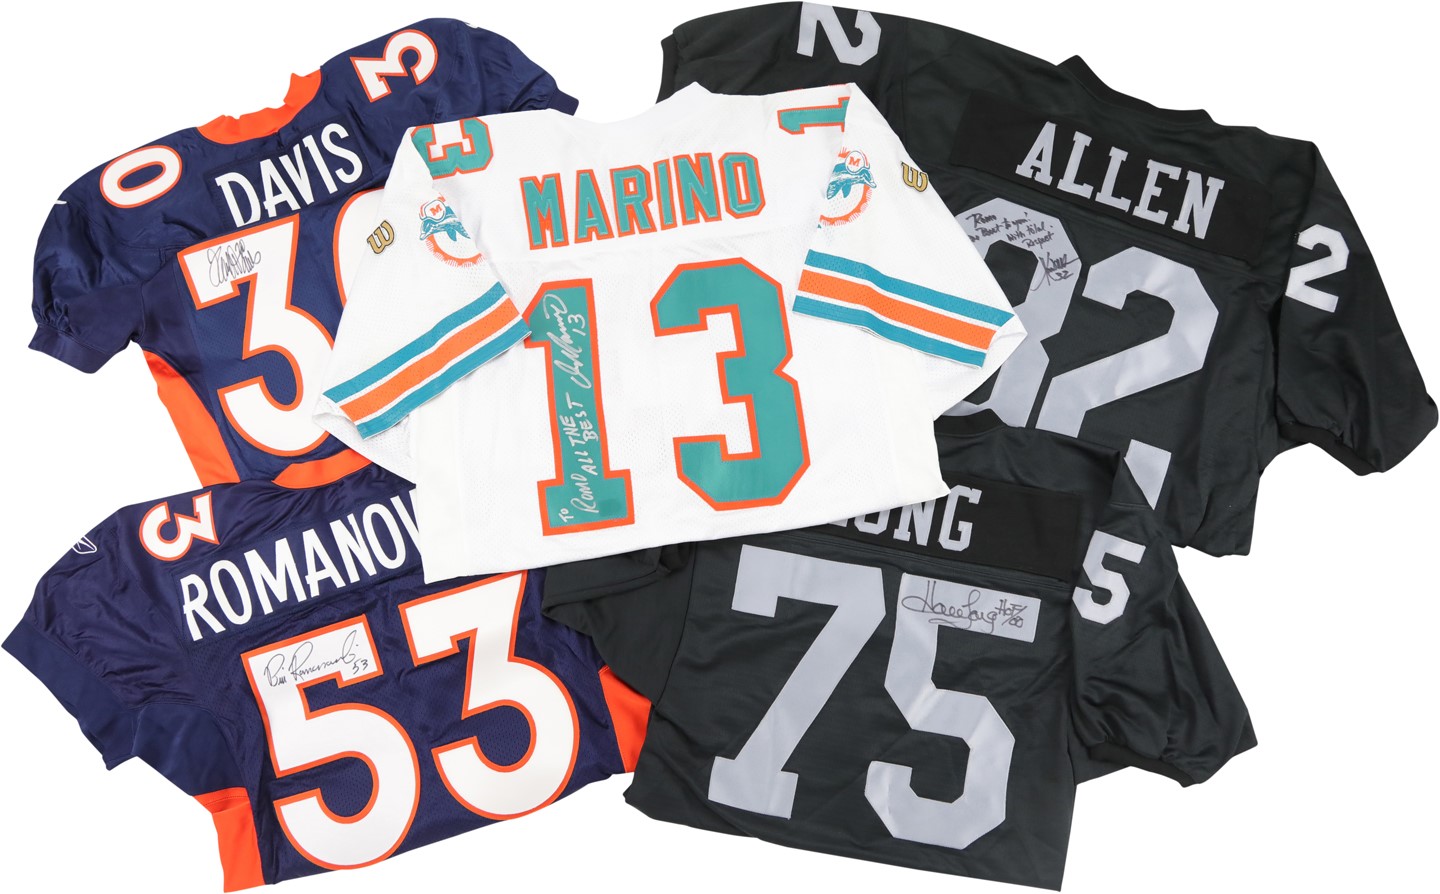 Football Legends Signed Jersey Collection to Bill Romanowski (5)